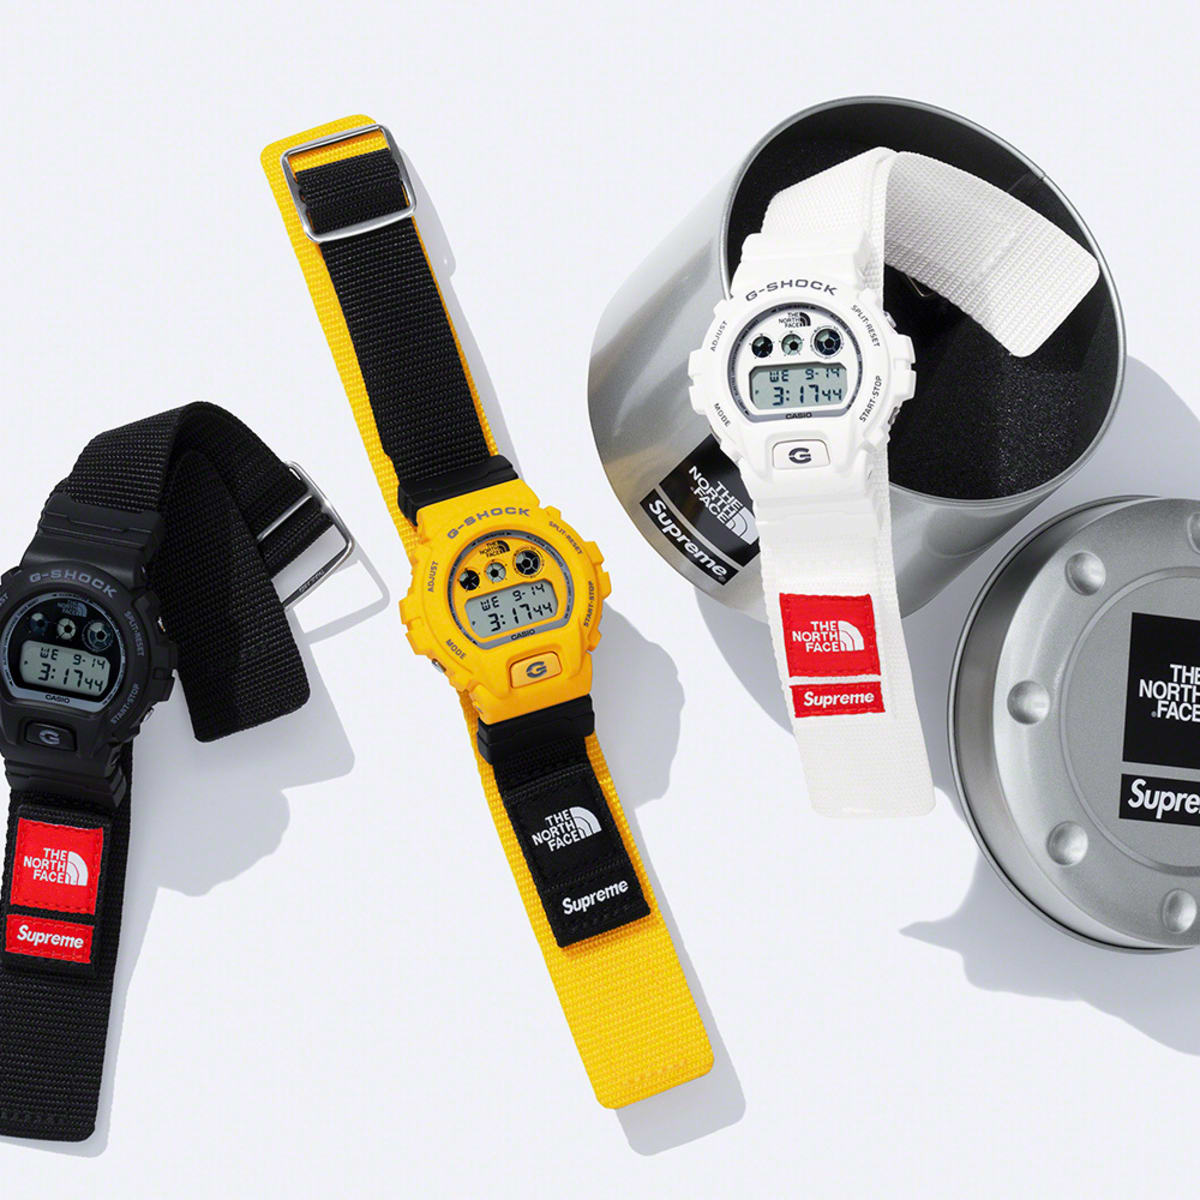 Supreme and the North Face preview their special edition G-Shock 